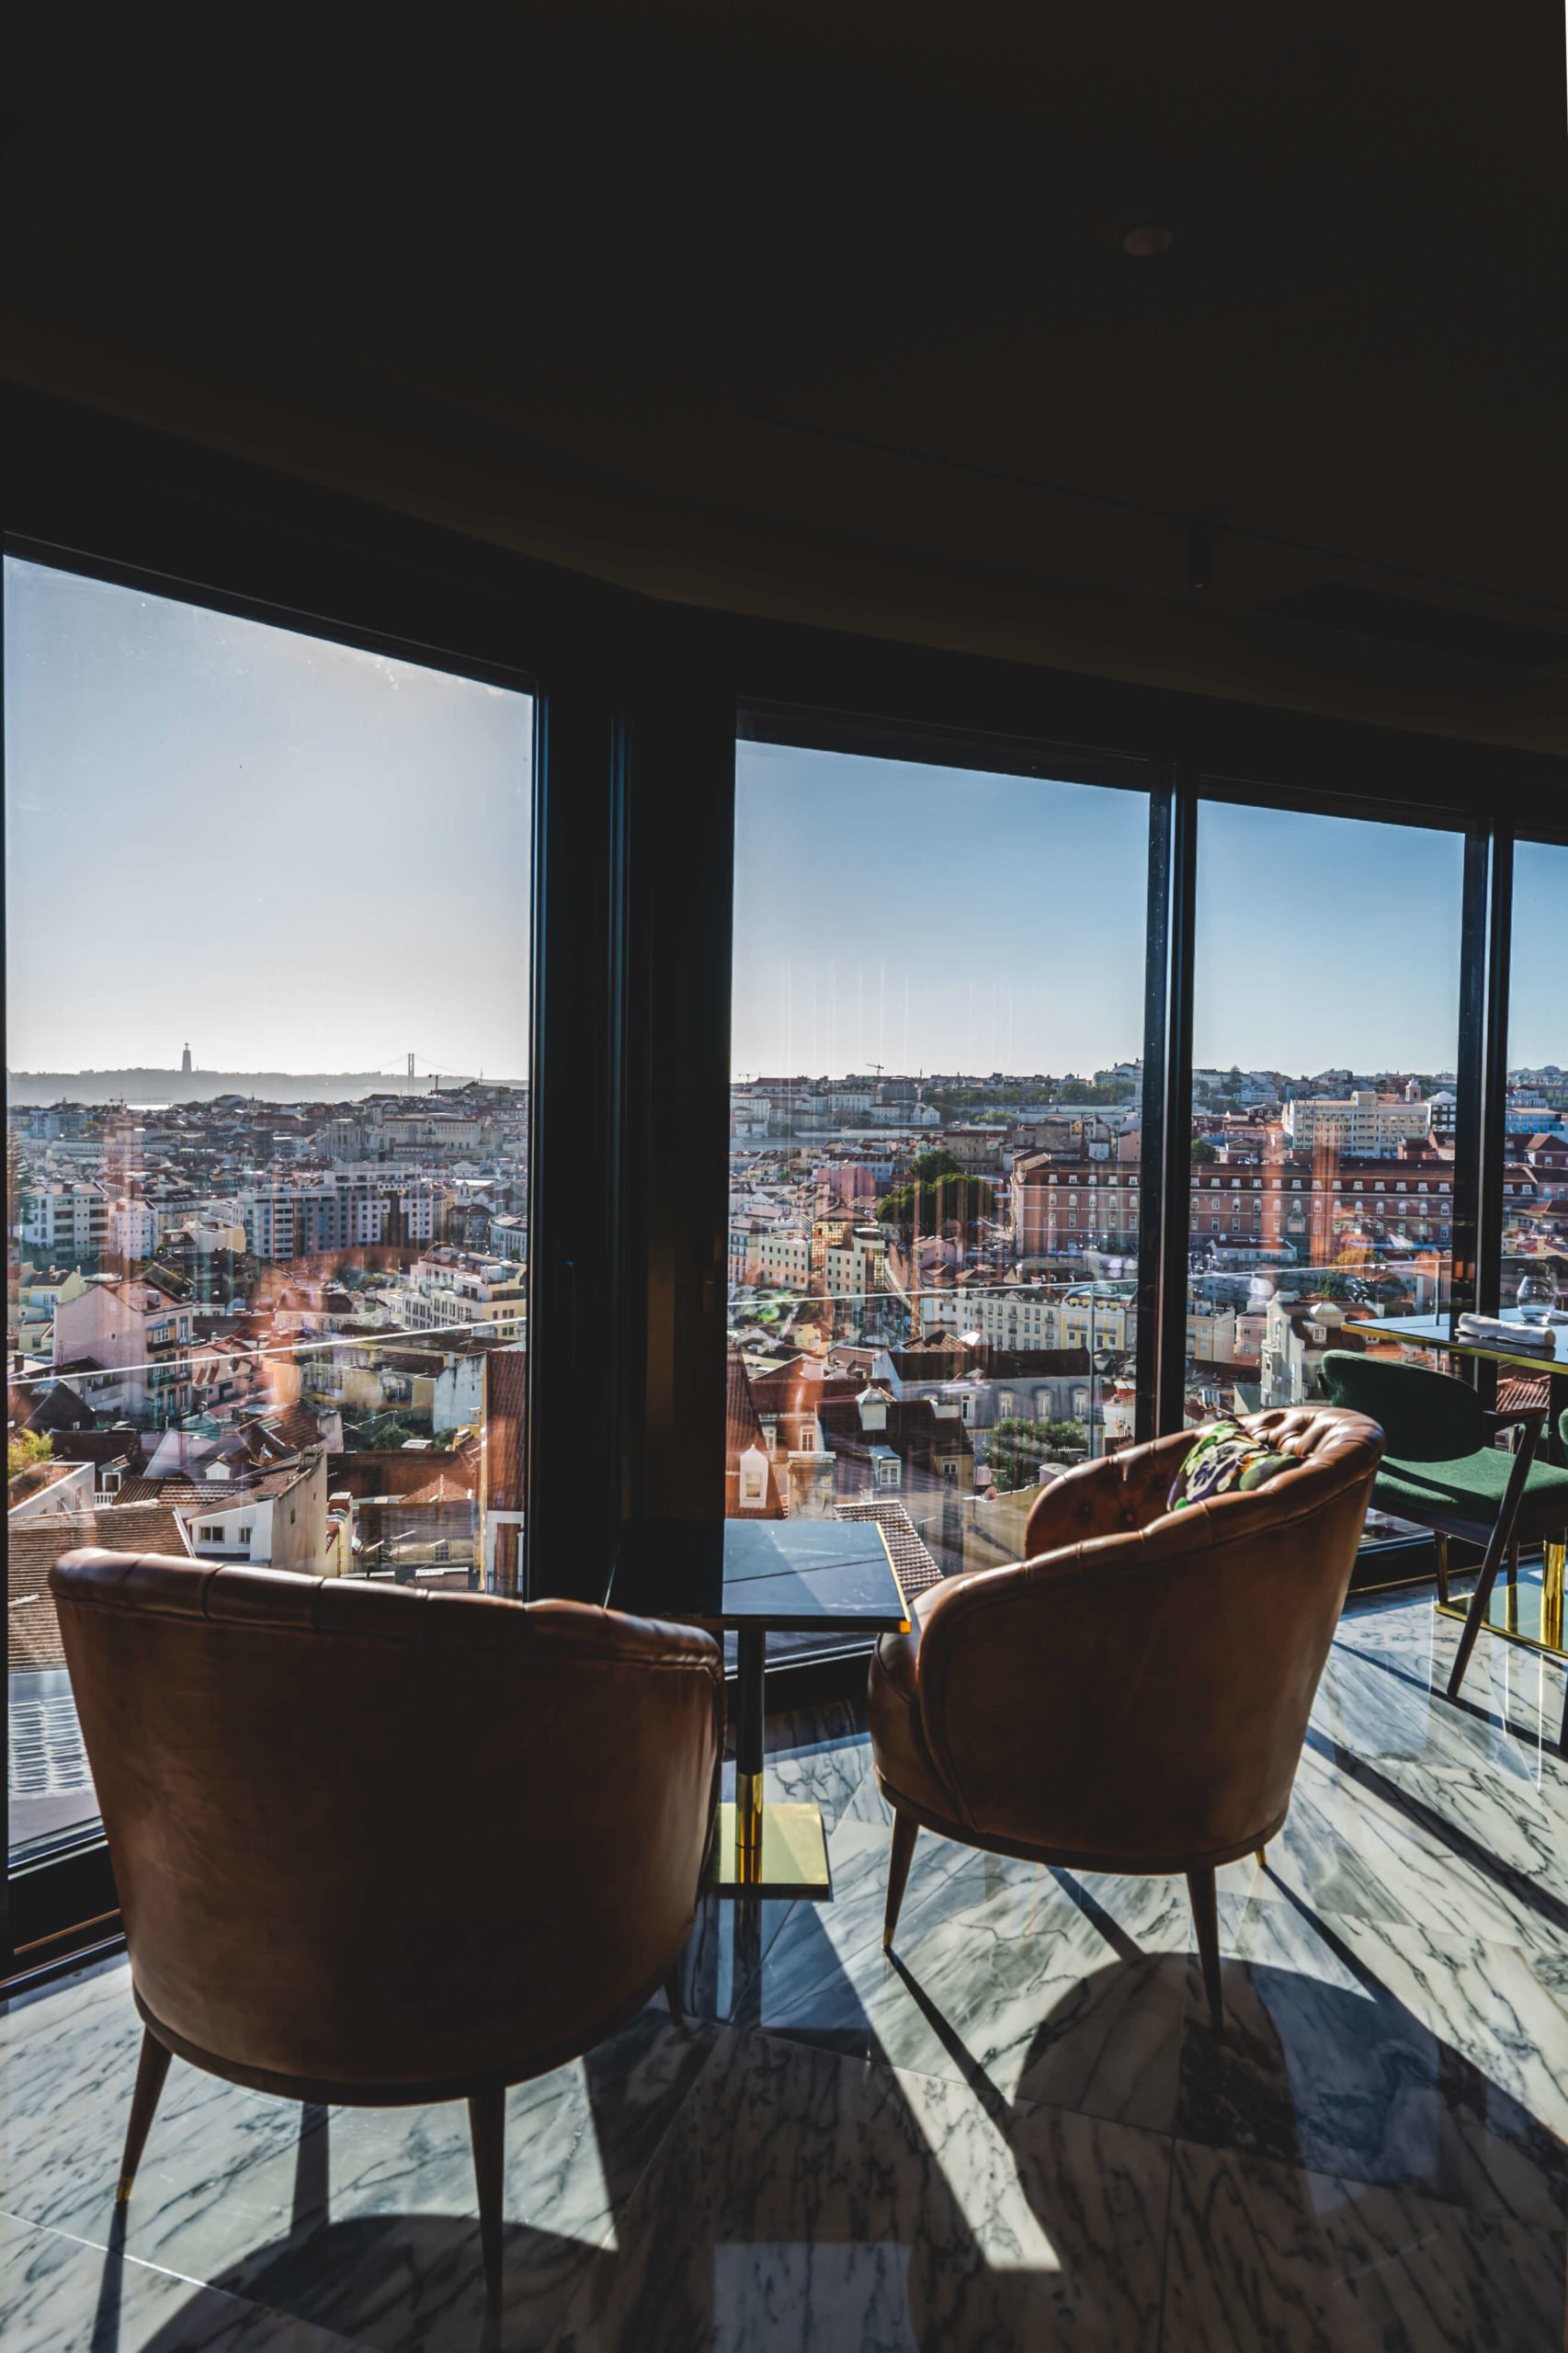 Room with two armchairs, facing the window overlooking the city of Lisbon